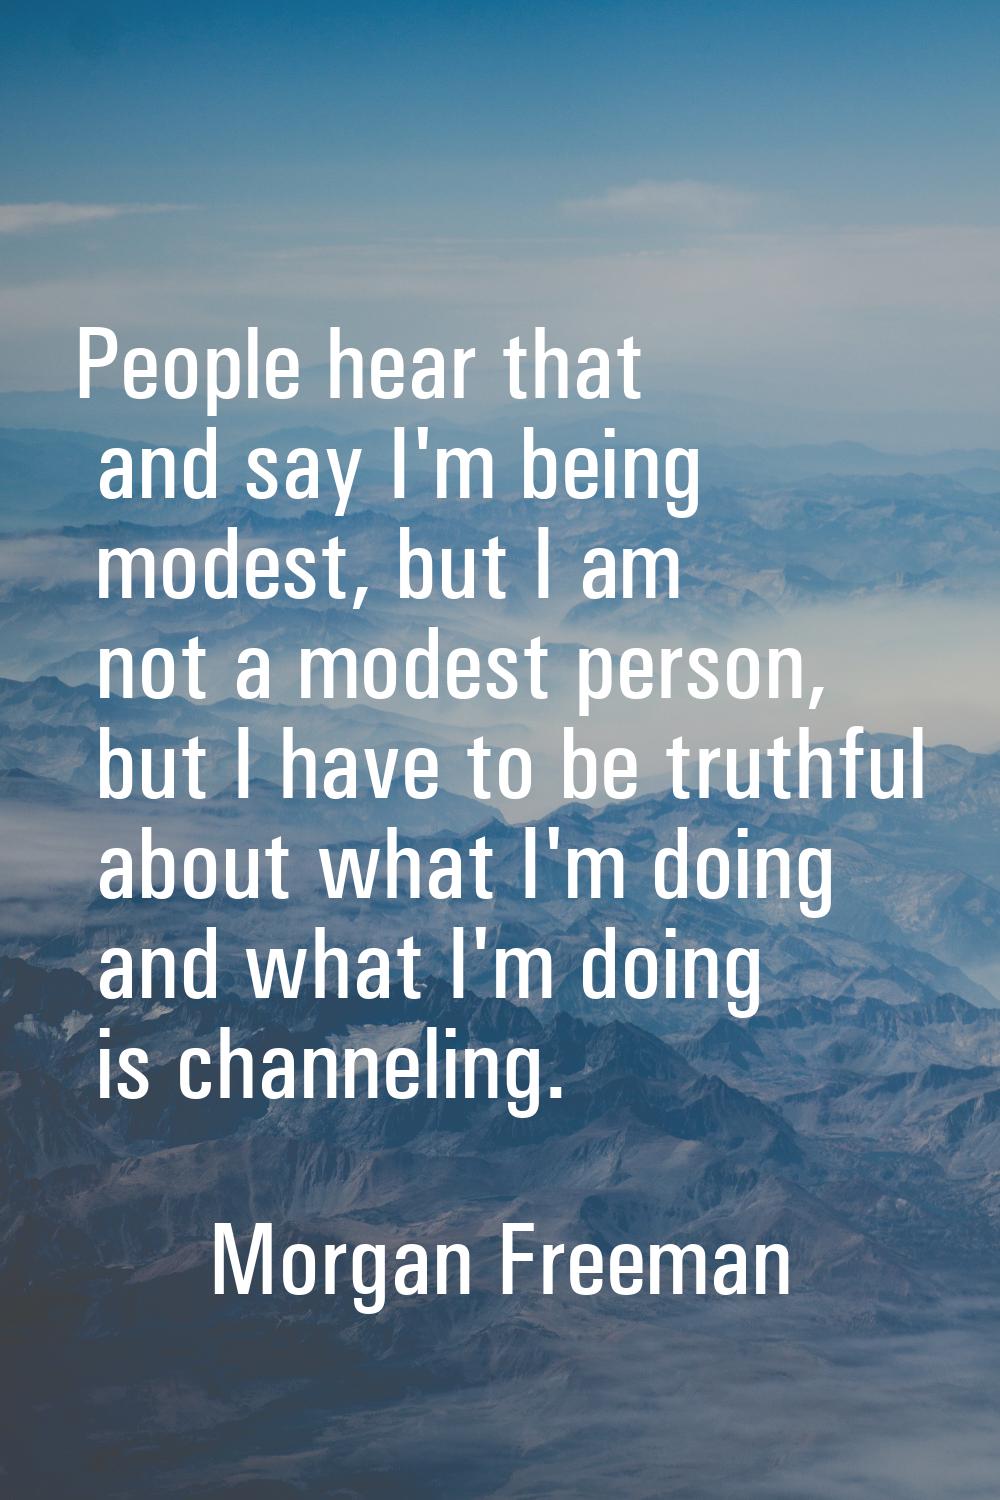 People hear that and say I'm being modest, but I am not a modest person, but I have to be truthful 